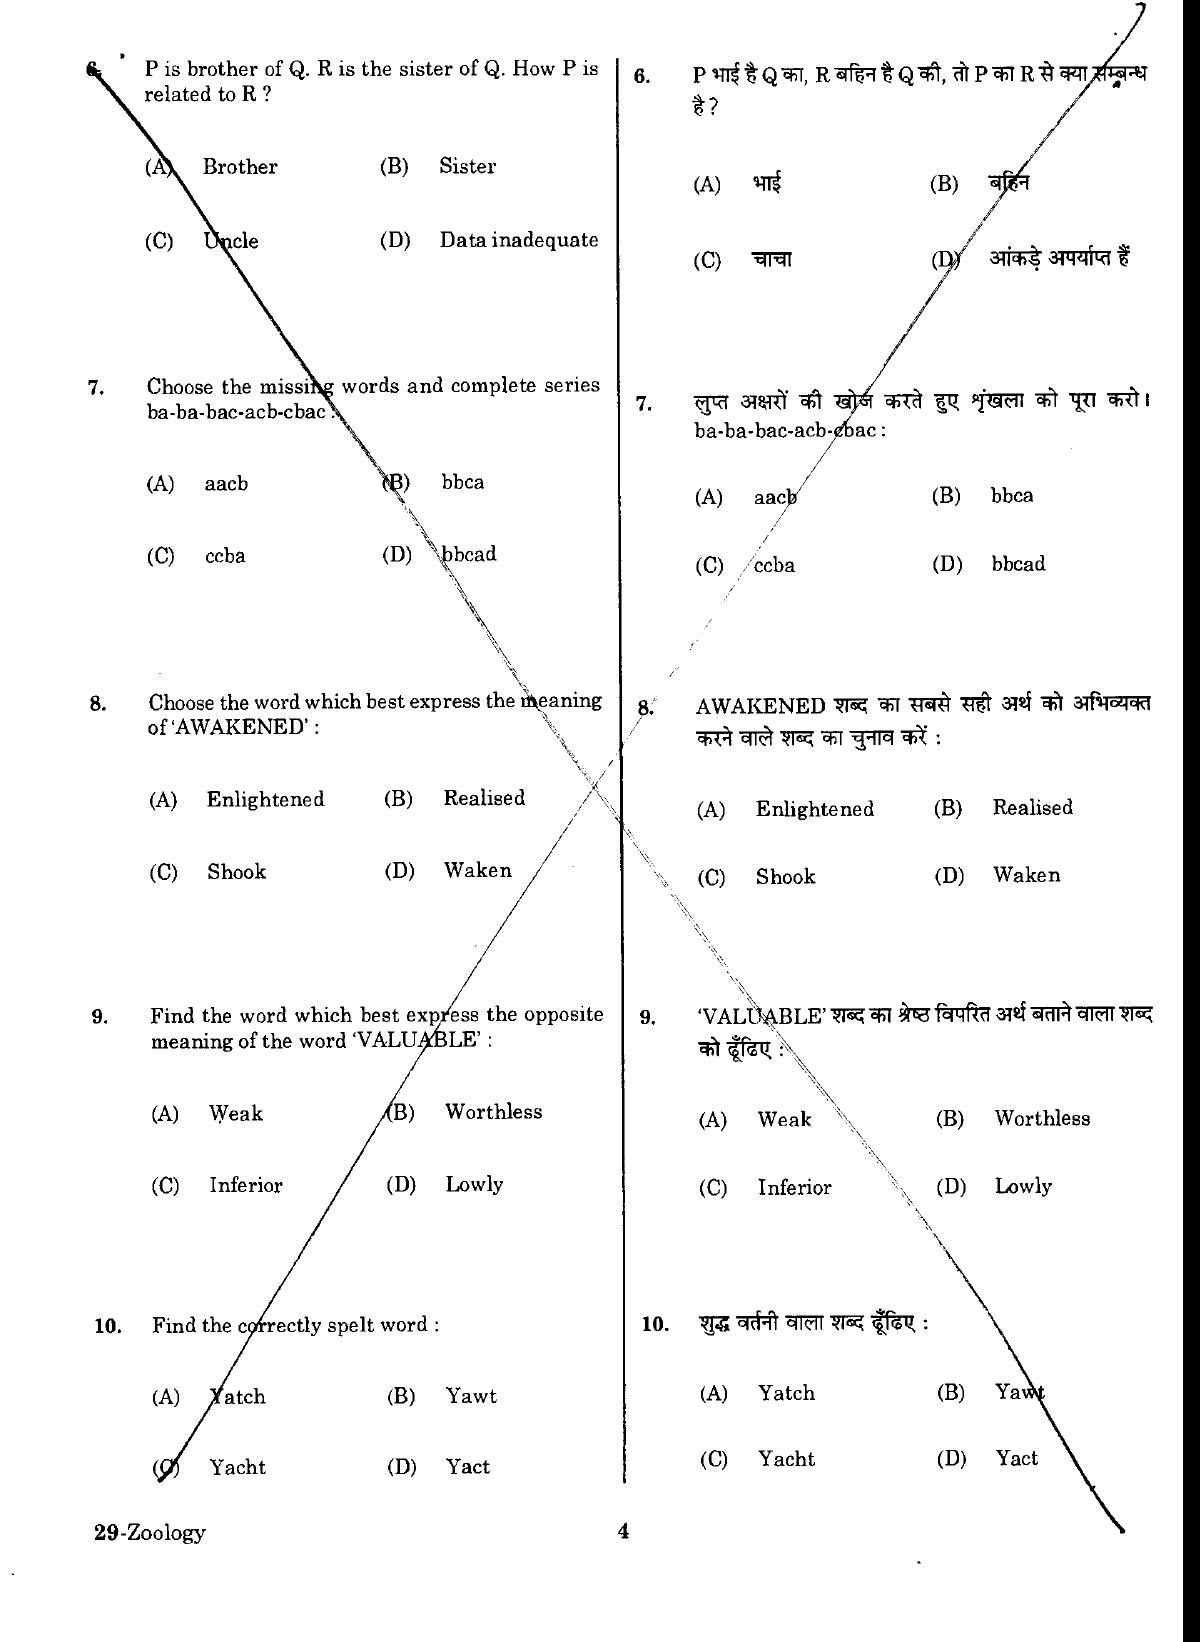 URATPG Zoology Sample Question Paper 2018 - Page 3